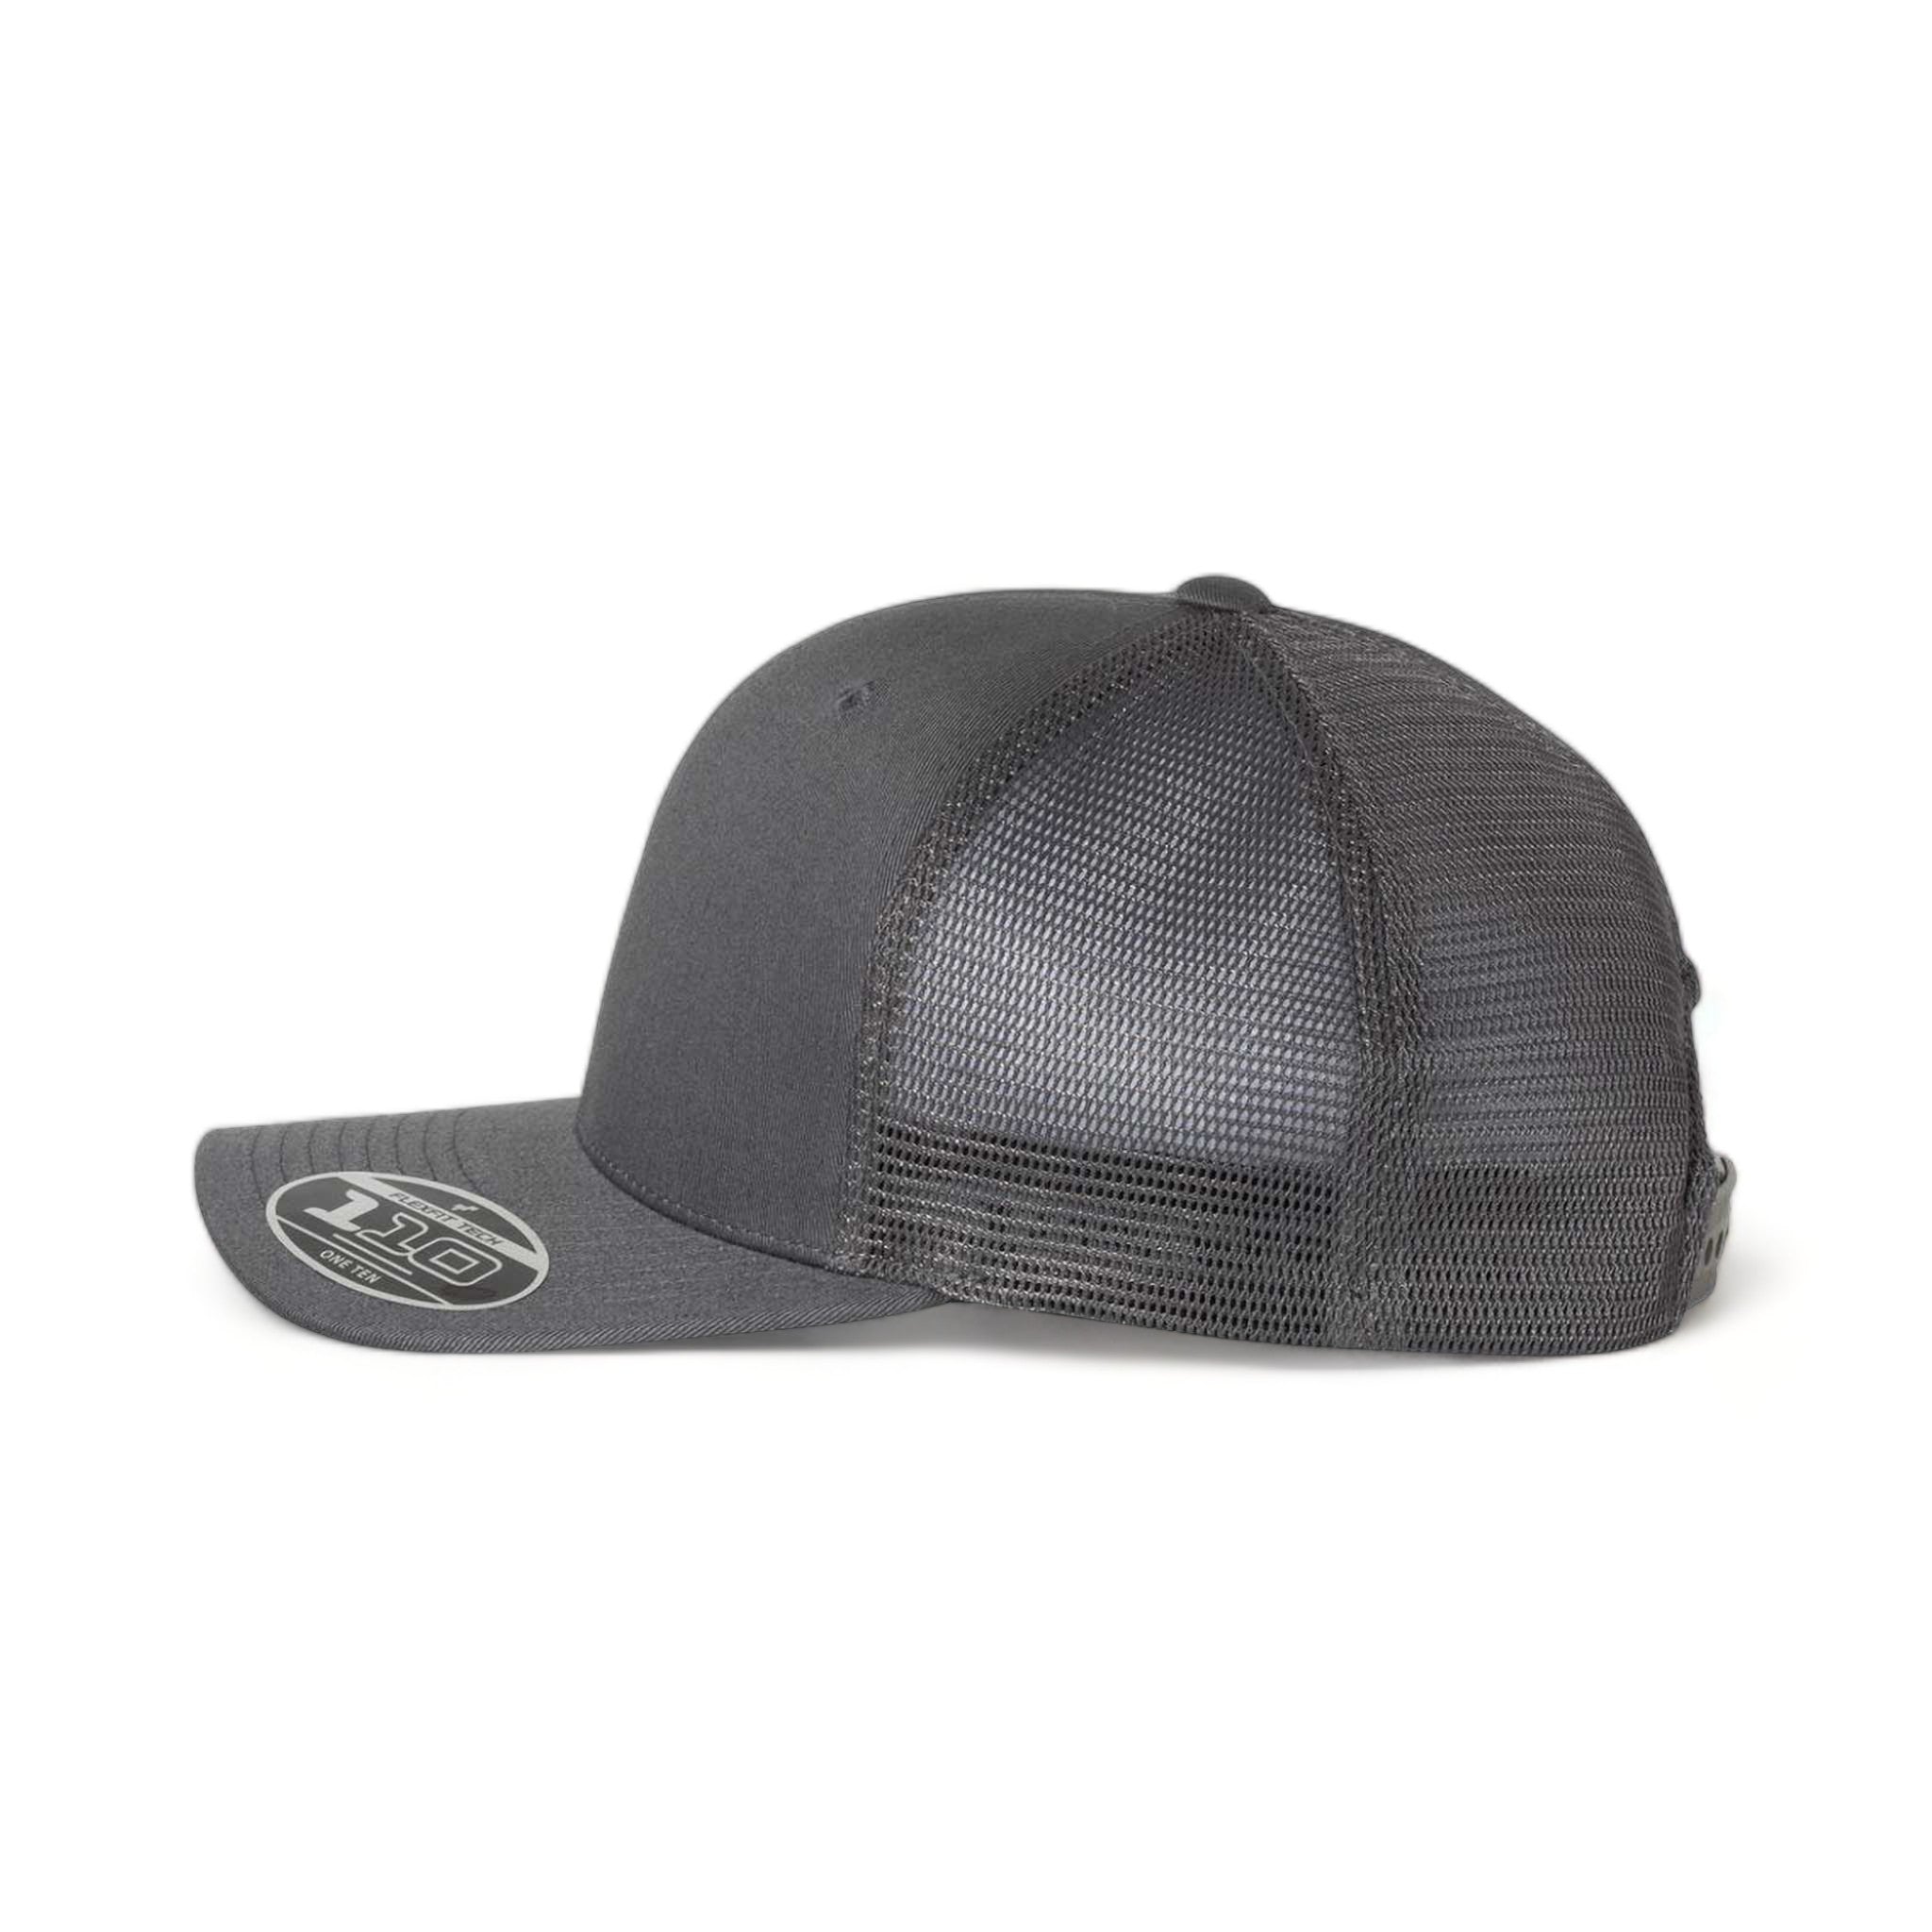 Side view of Flexfit 110M custom hat in charcoal